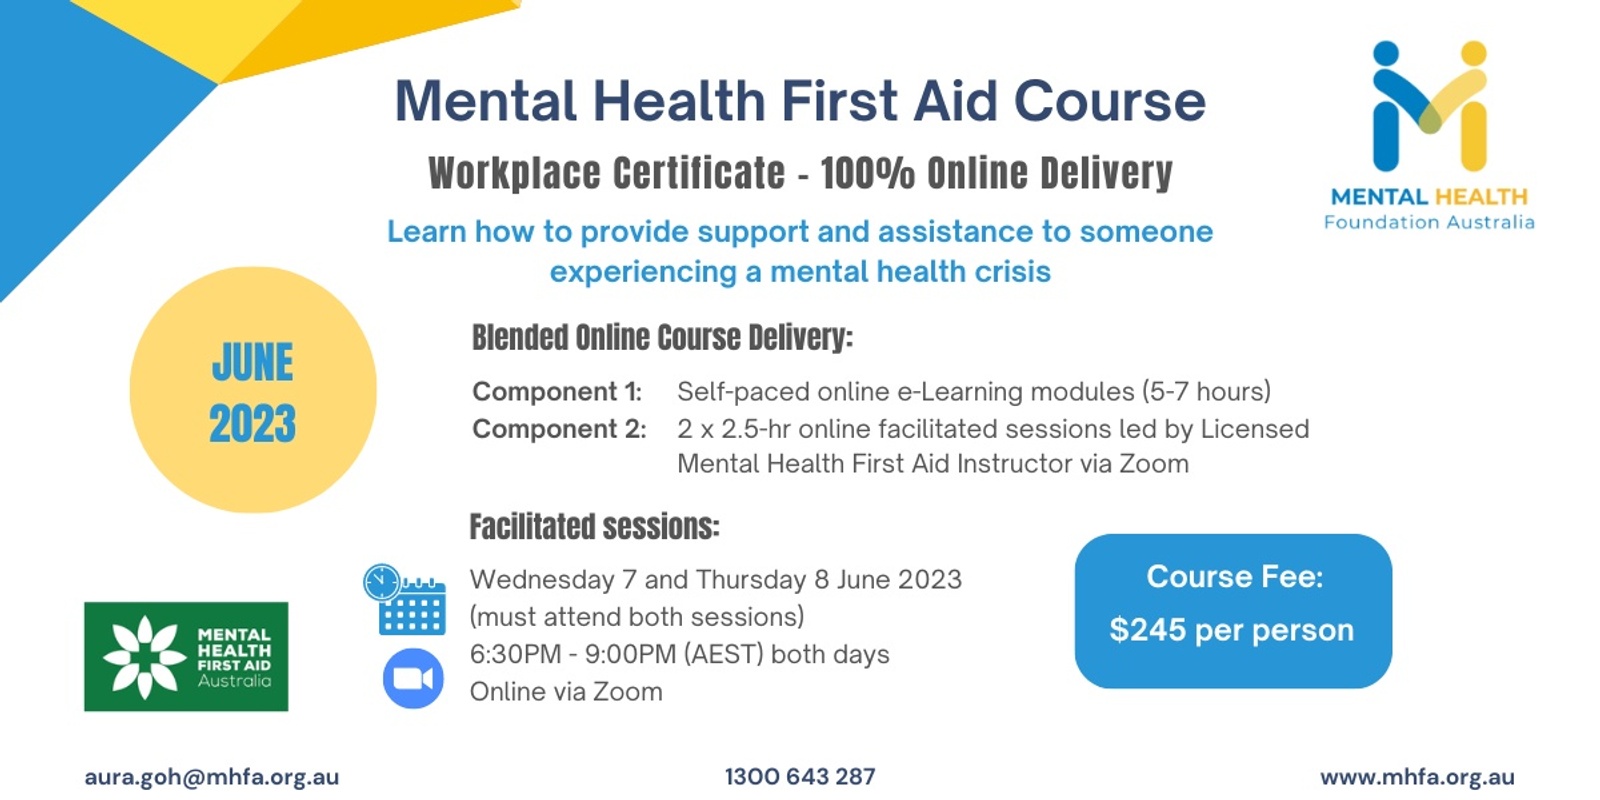 Blended Online Mental Health First Aid Course - June 2023